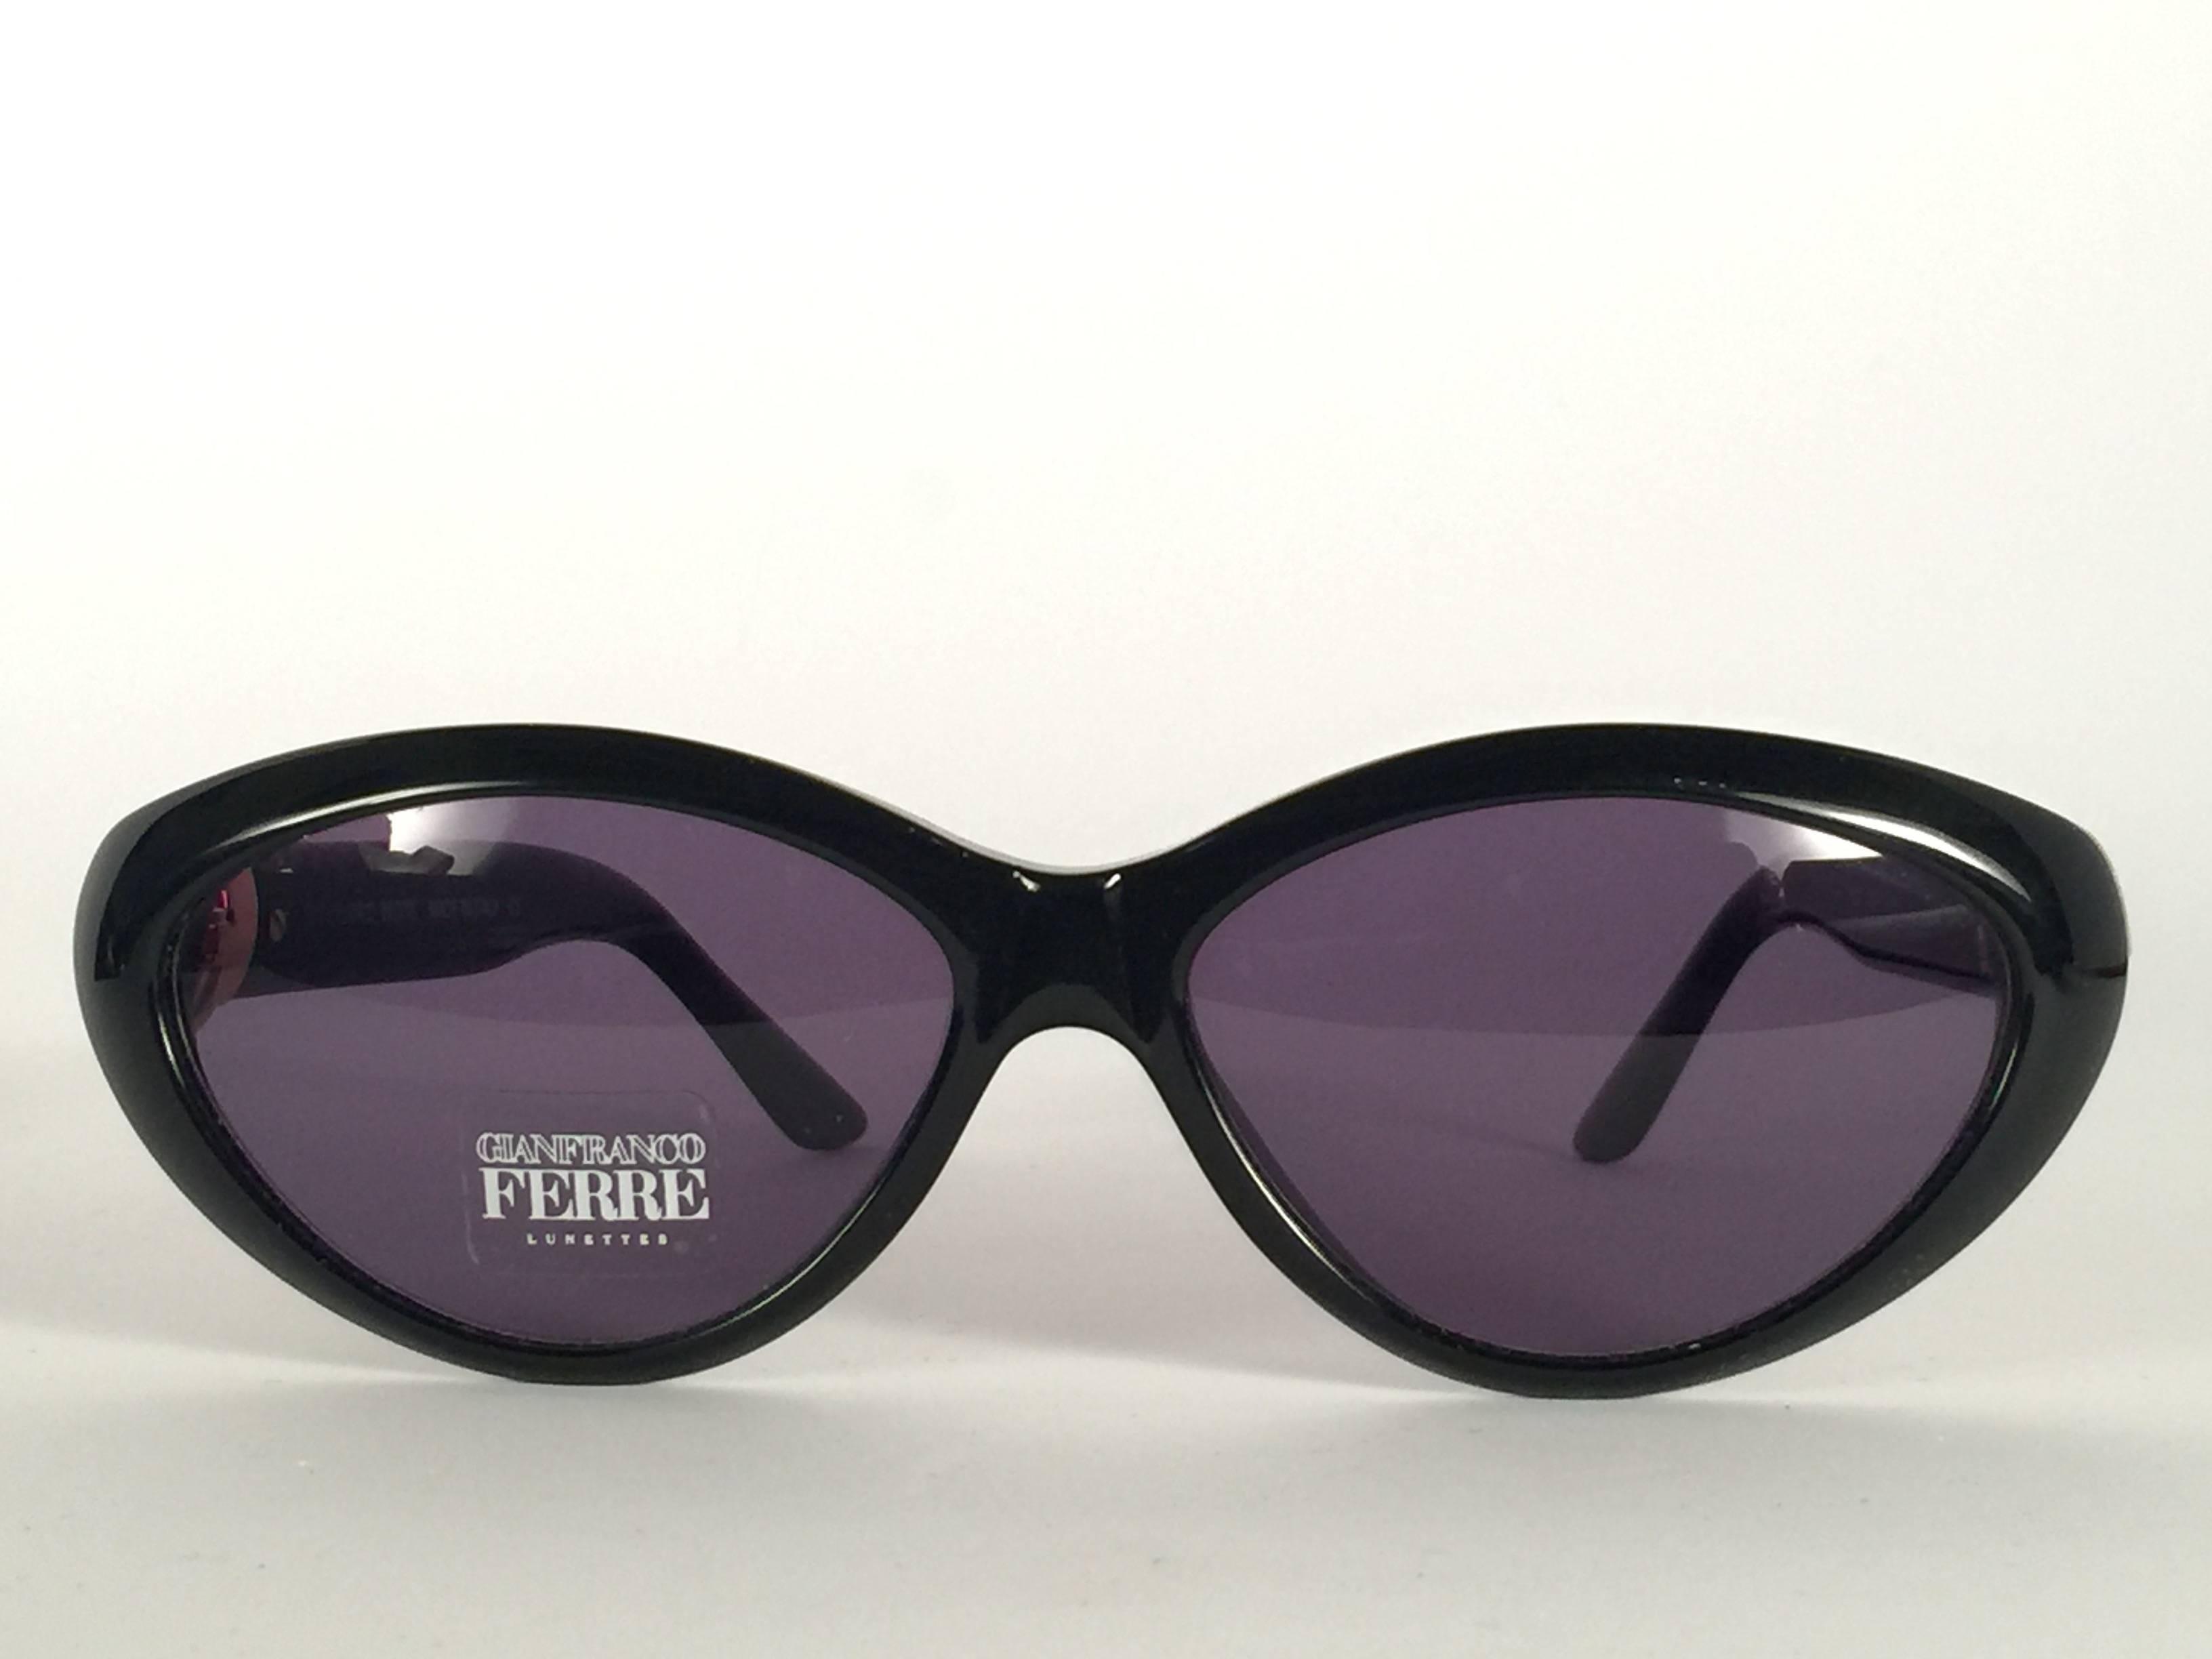 New vintage Gianfranco Ferre sunglasses.    

Black with rhinestones details frame holding a pair of spotless grey lenses.   

New, never worn or displayed. 

 Made in Italy.